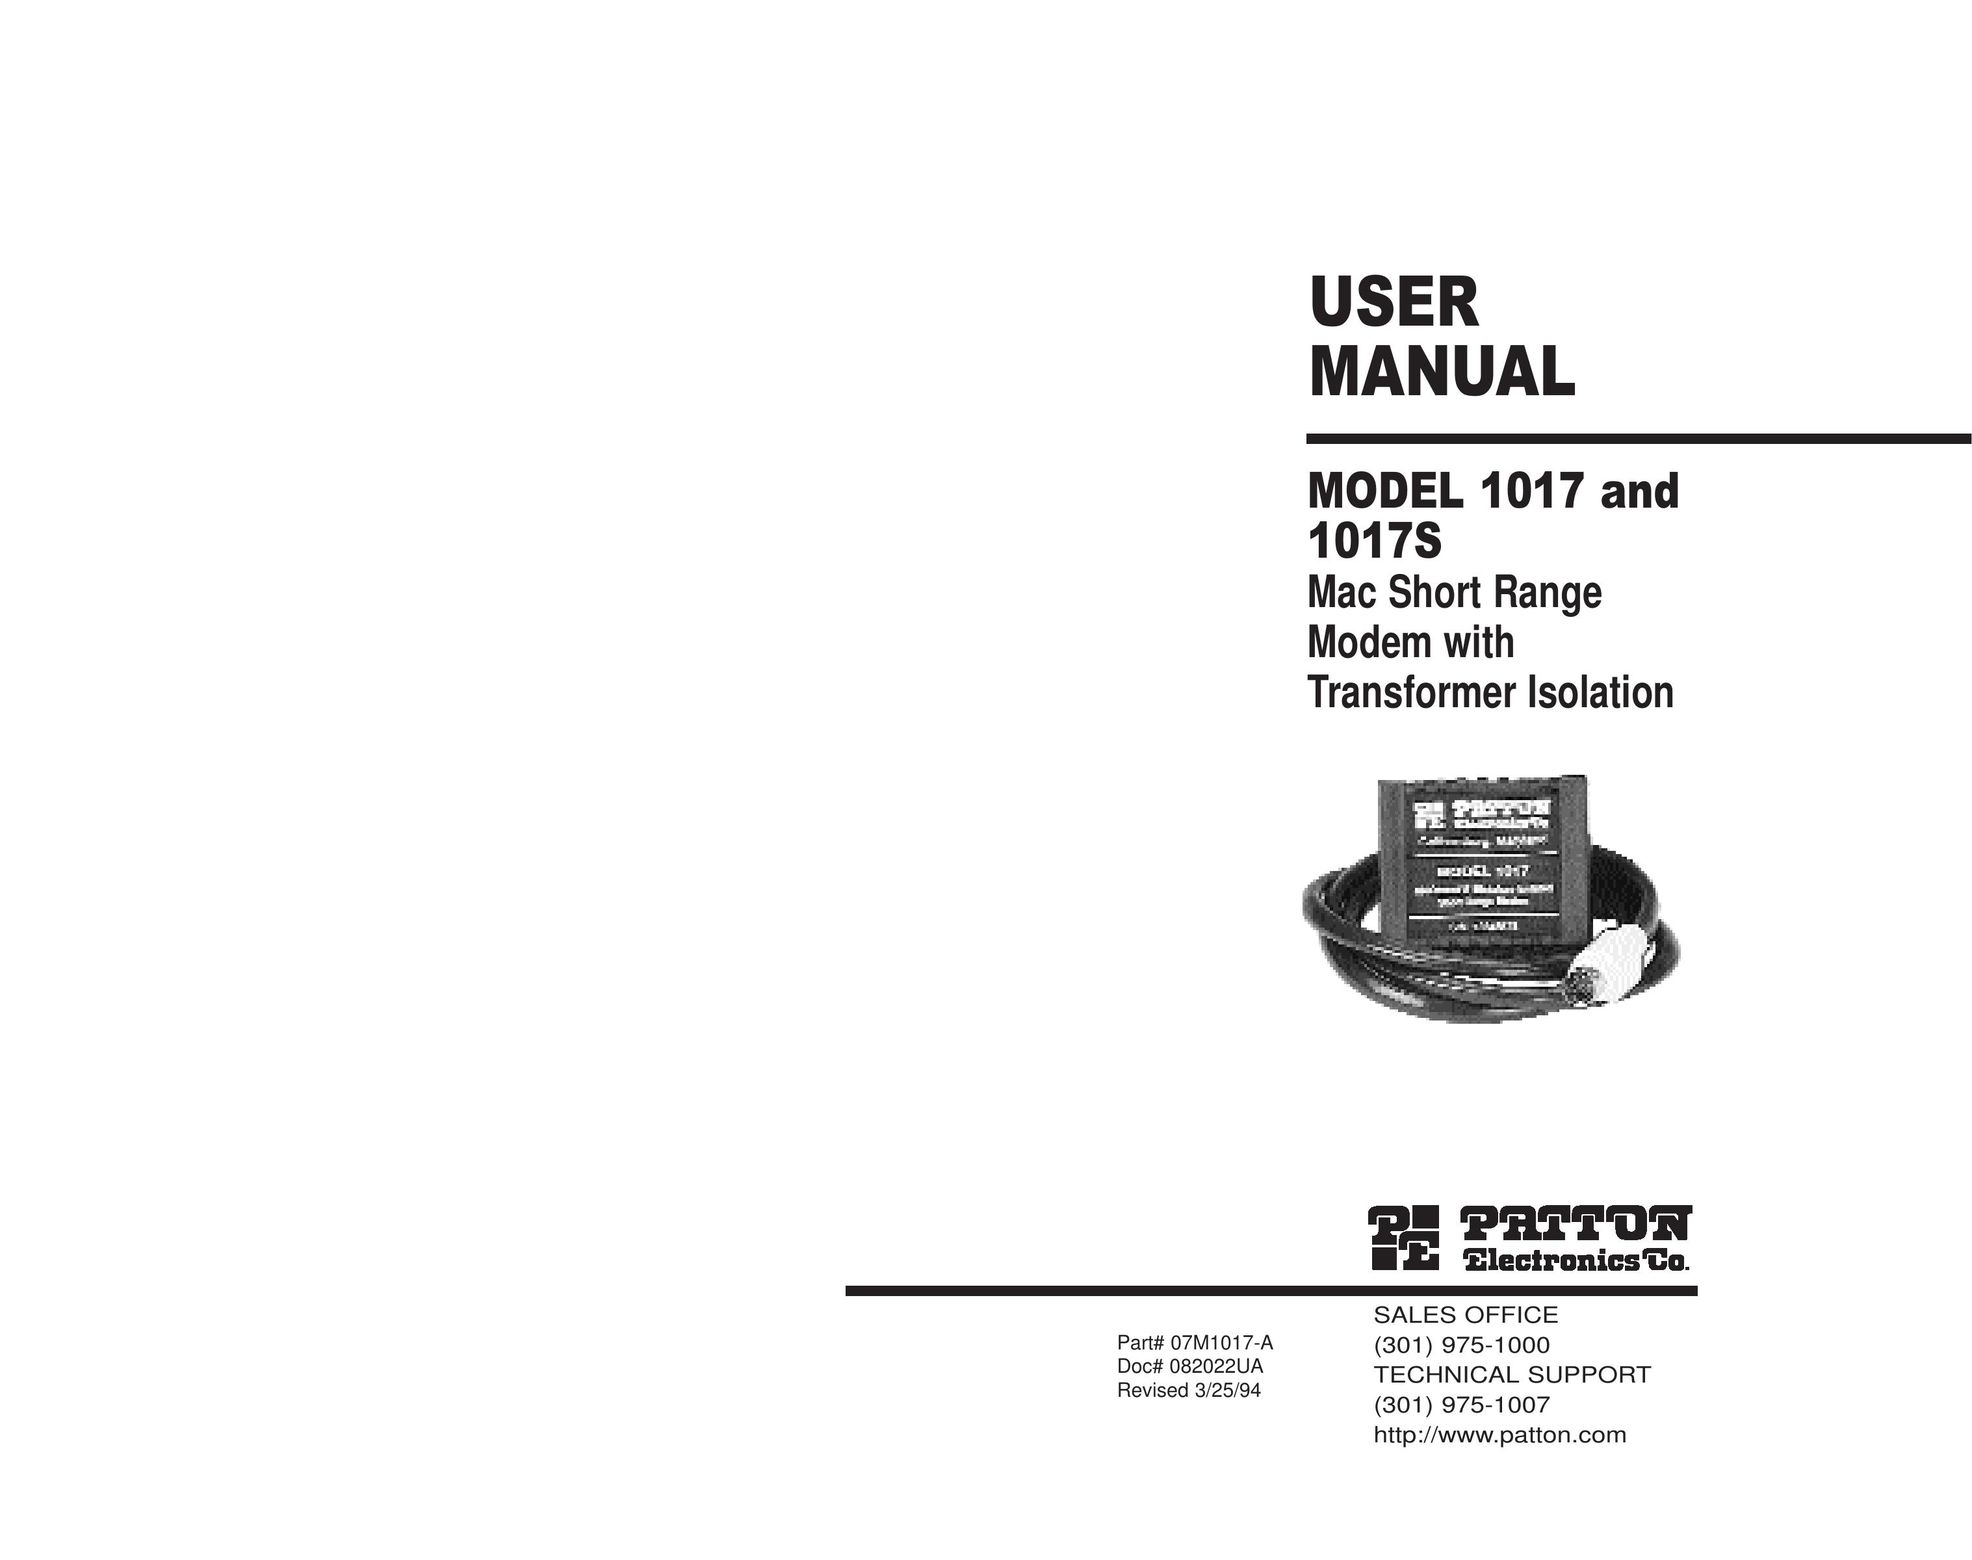 Patton electronic 1017S Network Card User Manual